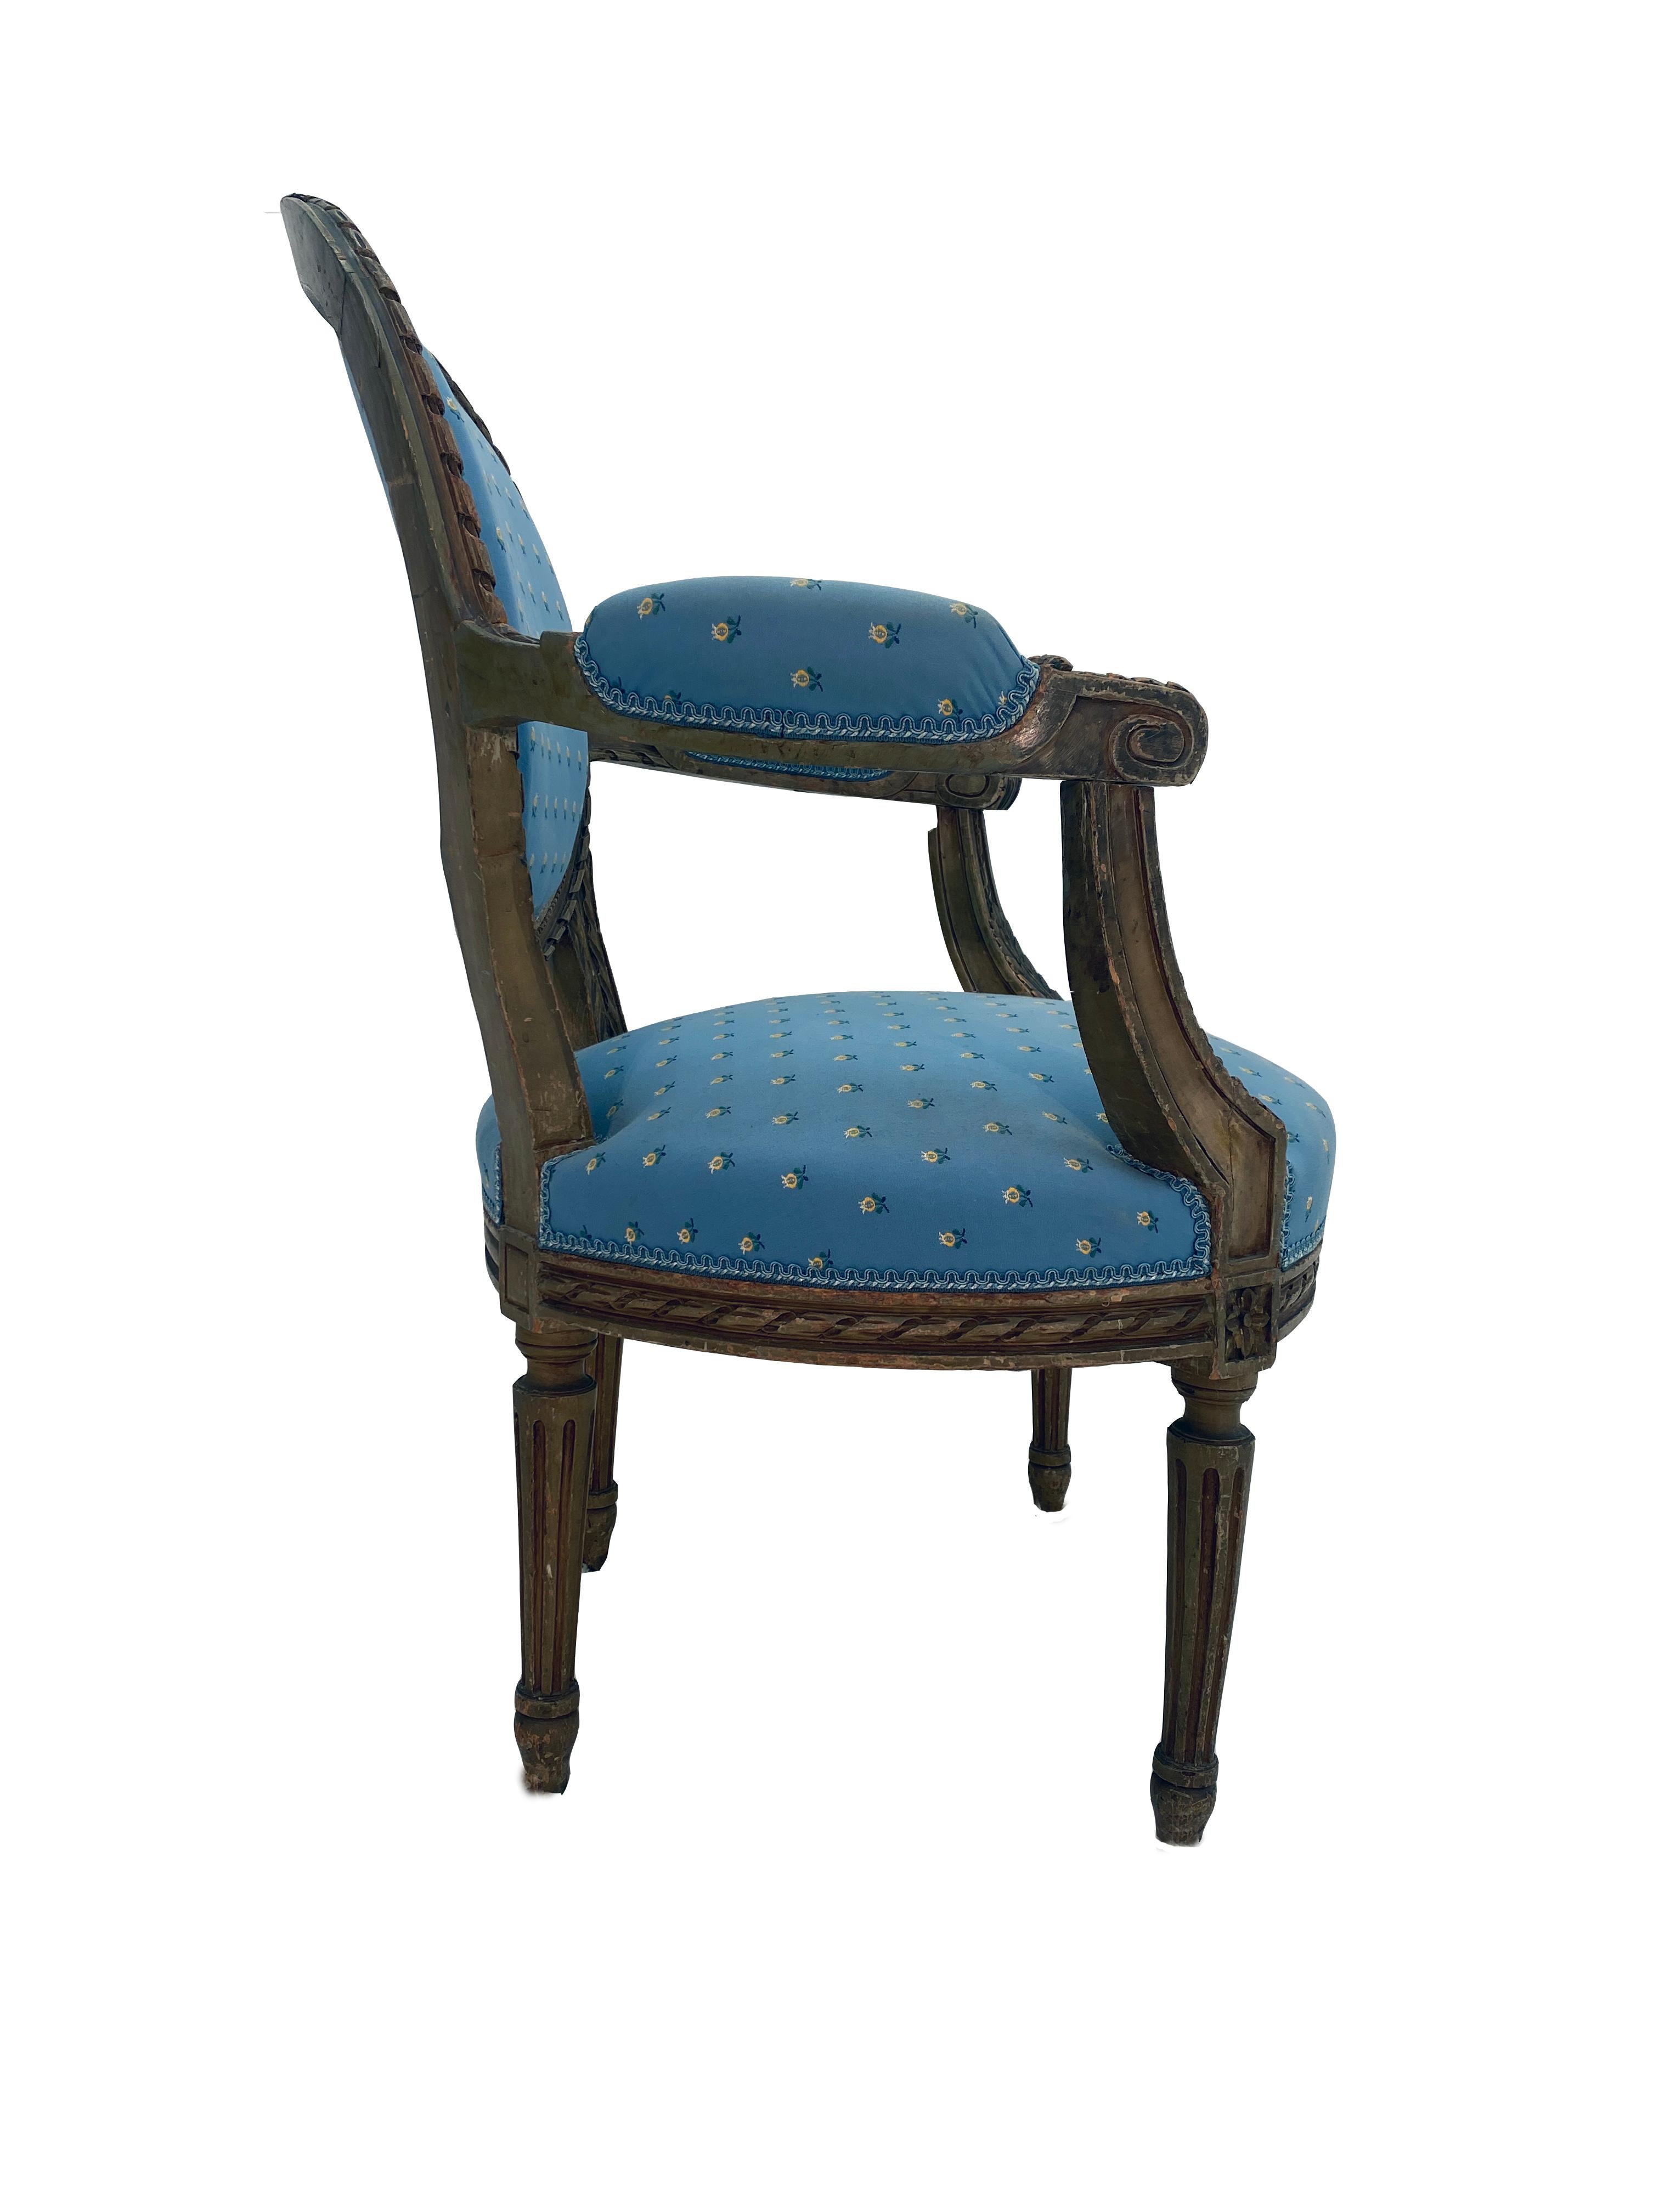 This is a Classic French Louis XVI arm chair in remarkable condition. The chair was made from solid walnut. It is very solid with no signs of previous damage or repairs. The upholstery has been updated and the fabric is in outstanding condition with